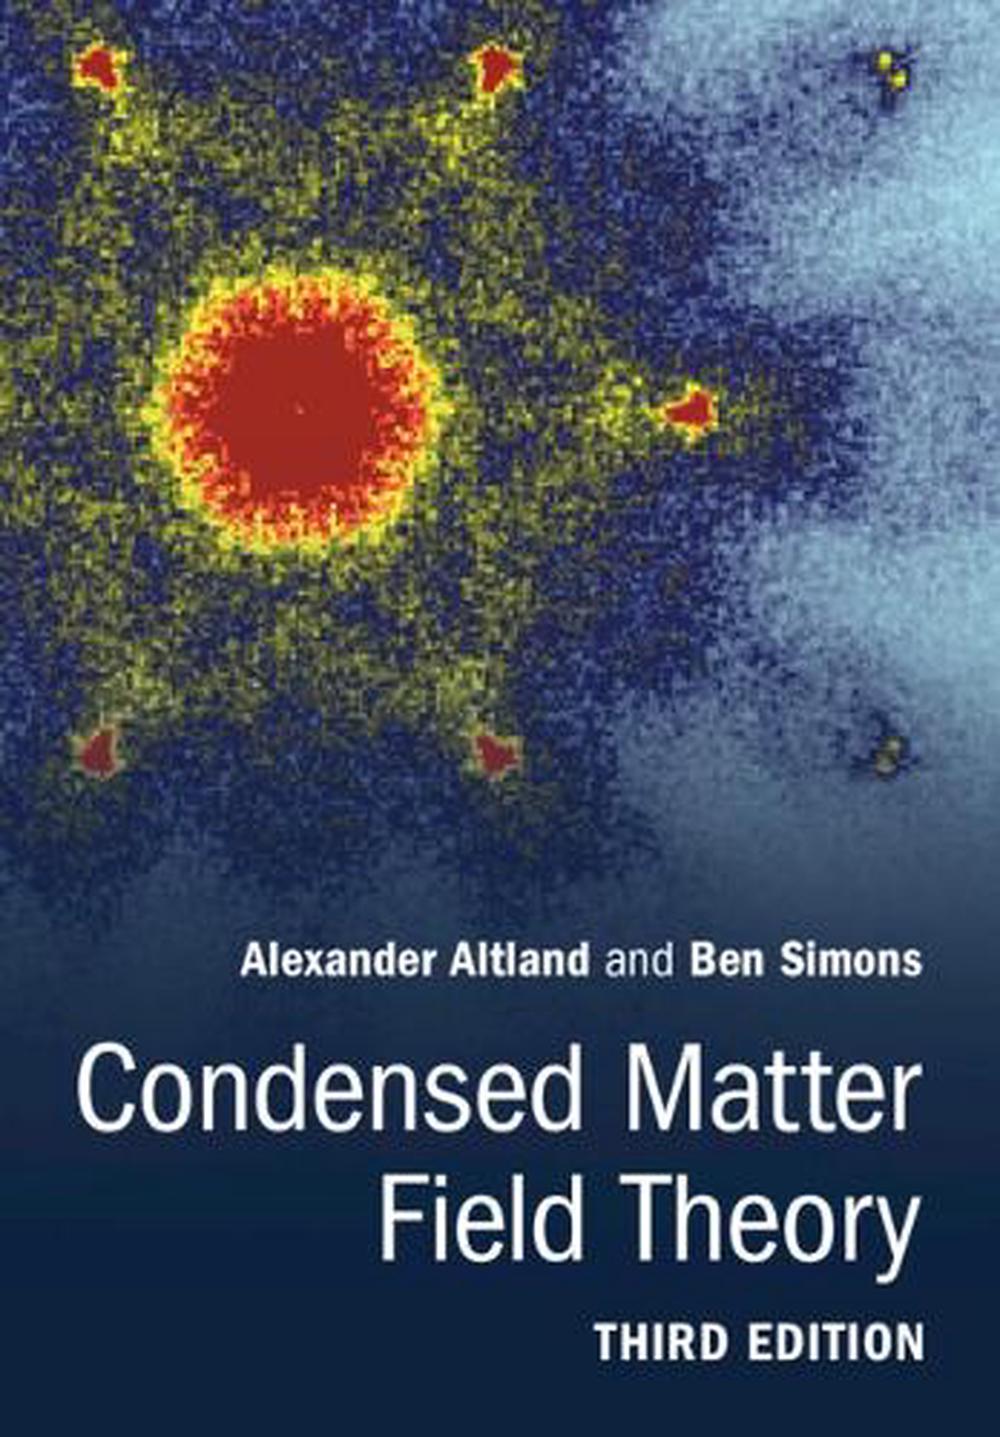 Condensed Matter Field Theory by Alexander Altland (English 